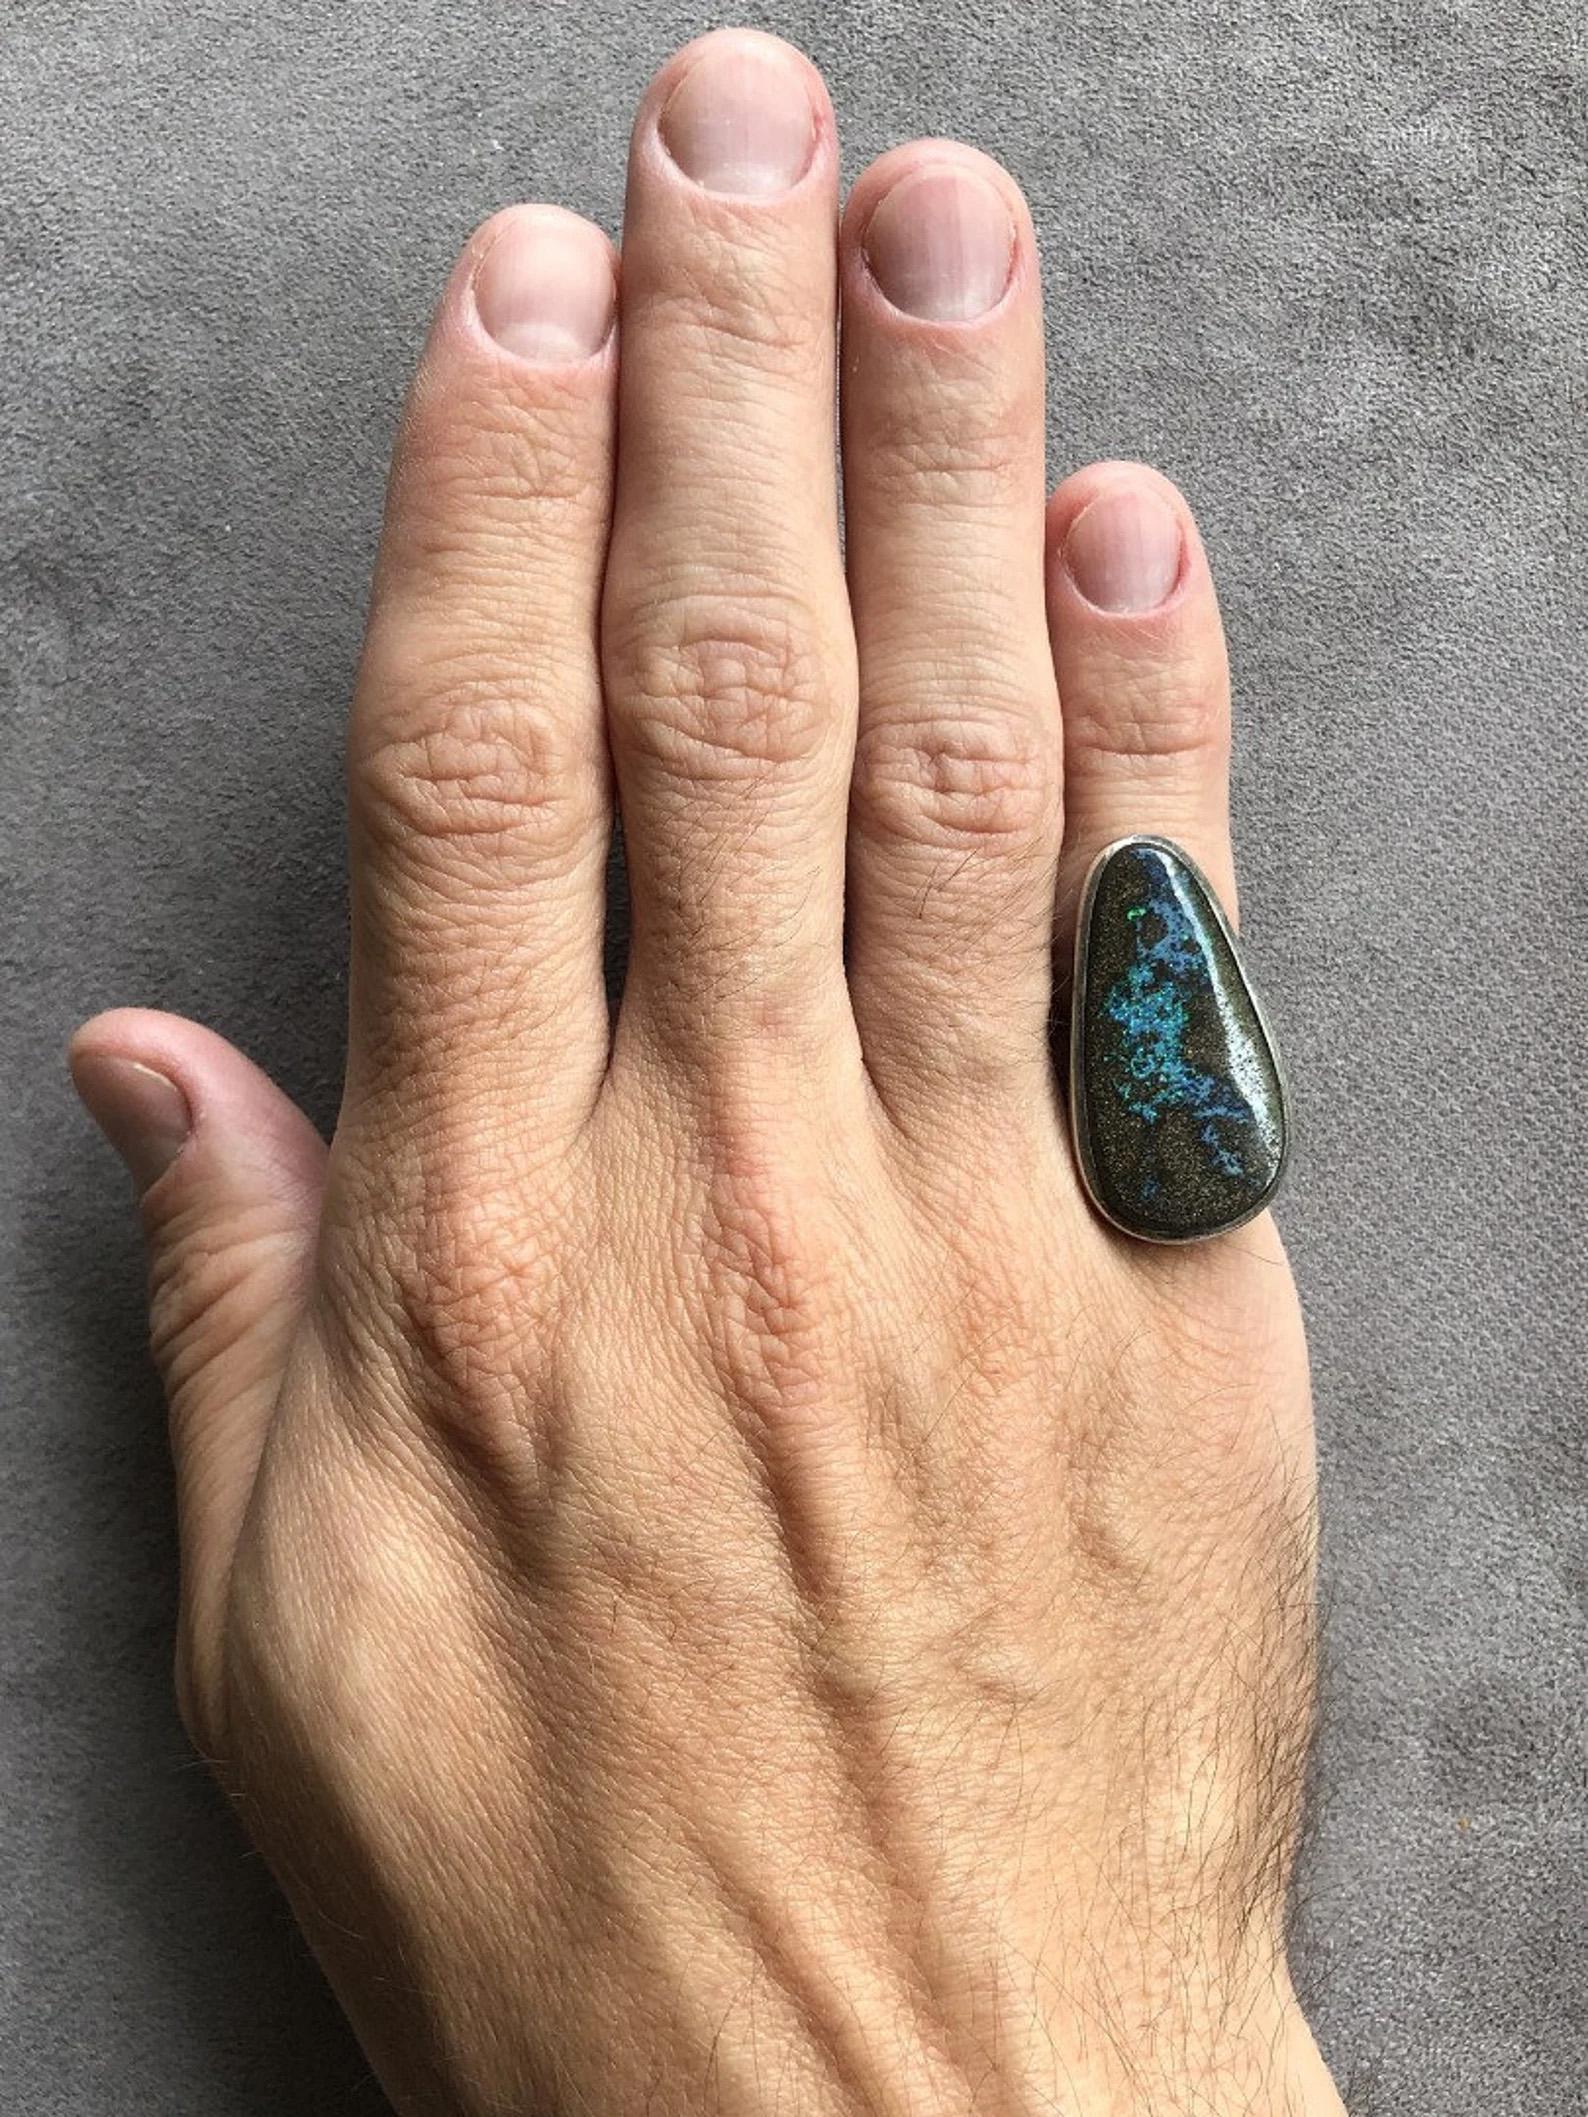 Artisan Big Boulder Opal Silver Ring Chunky Cabochon Turquoise Blue Brown Gemstone